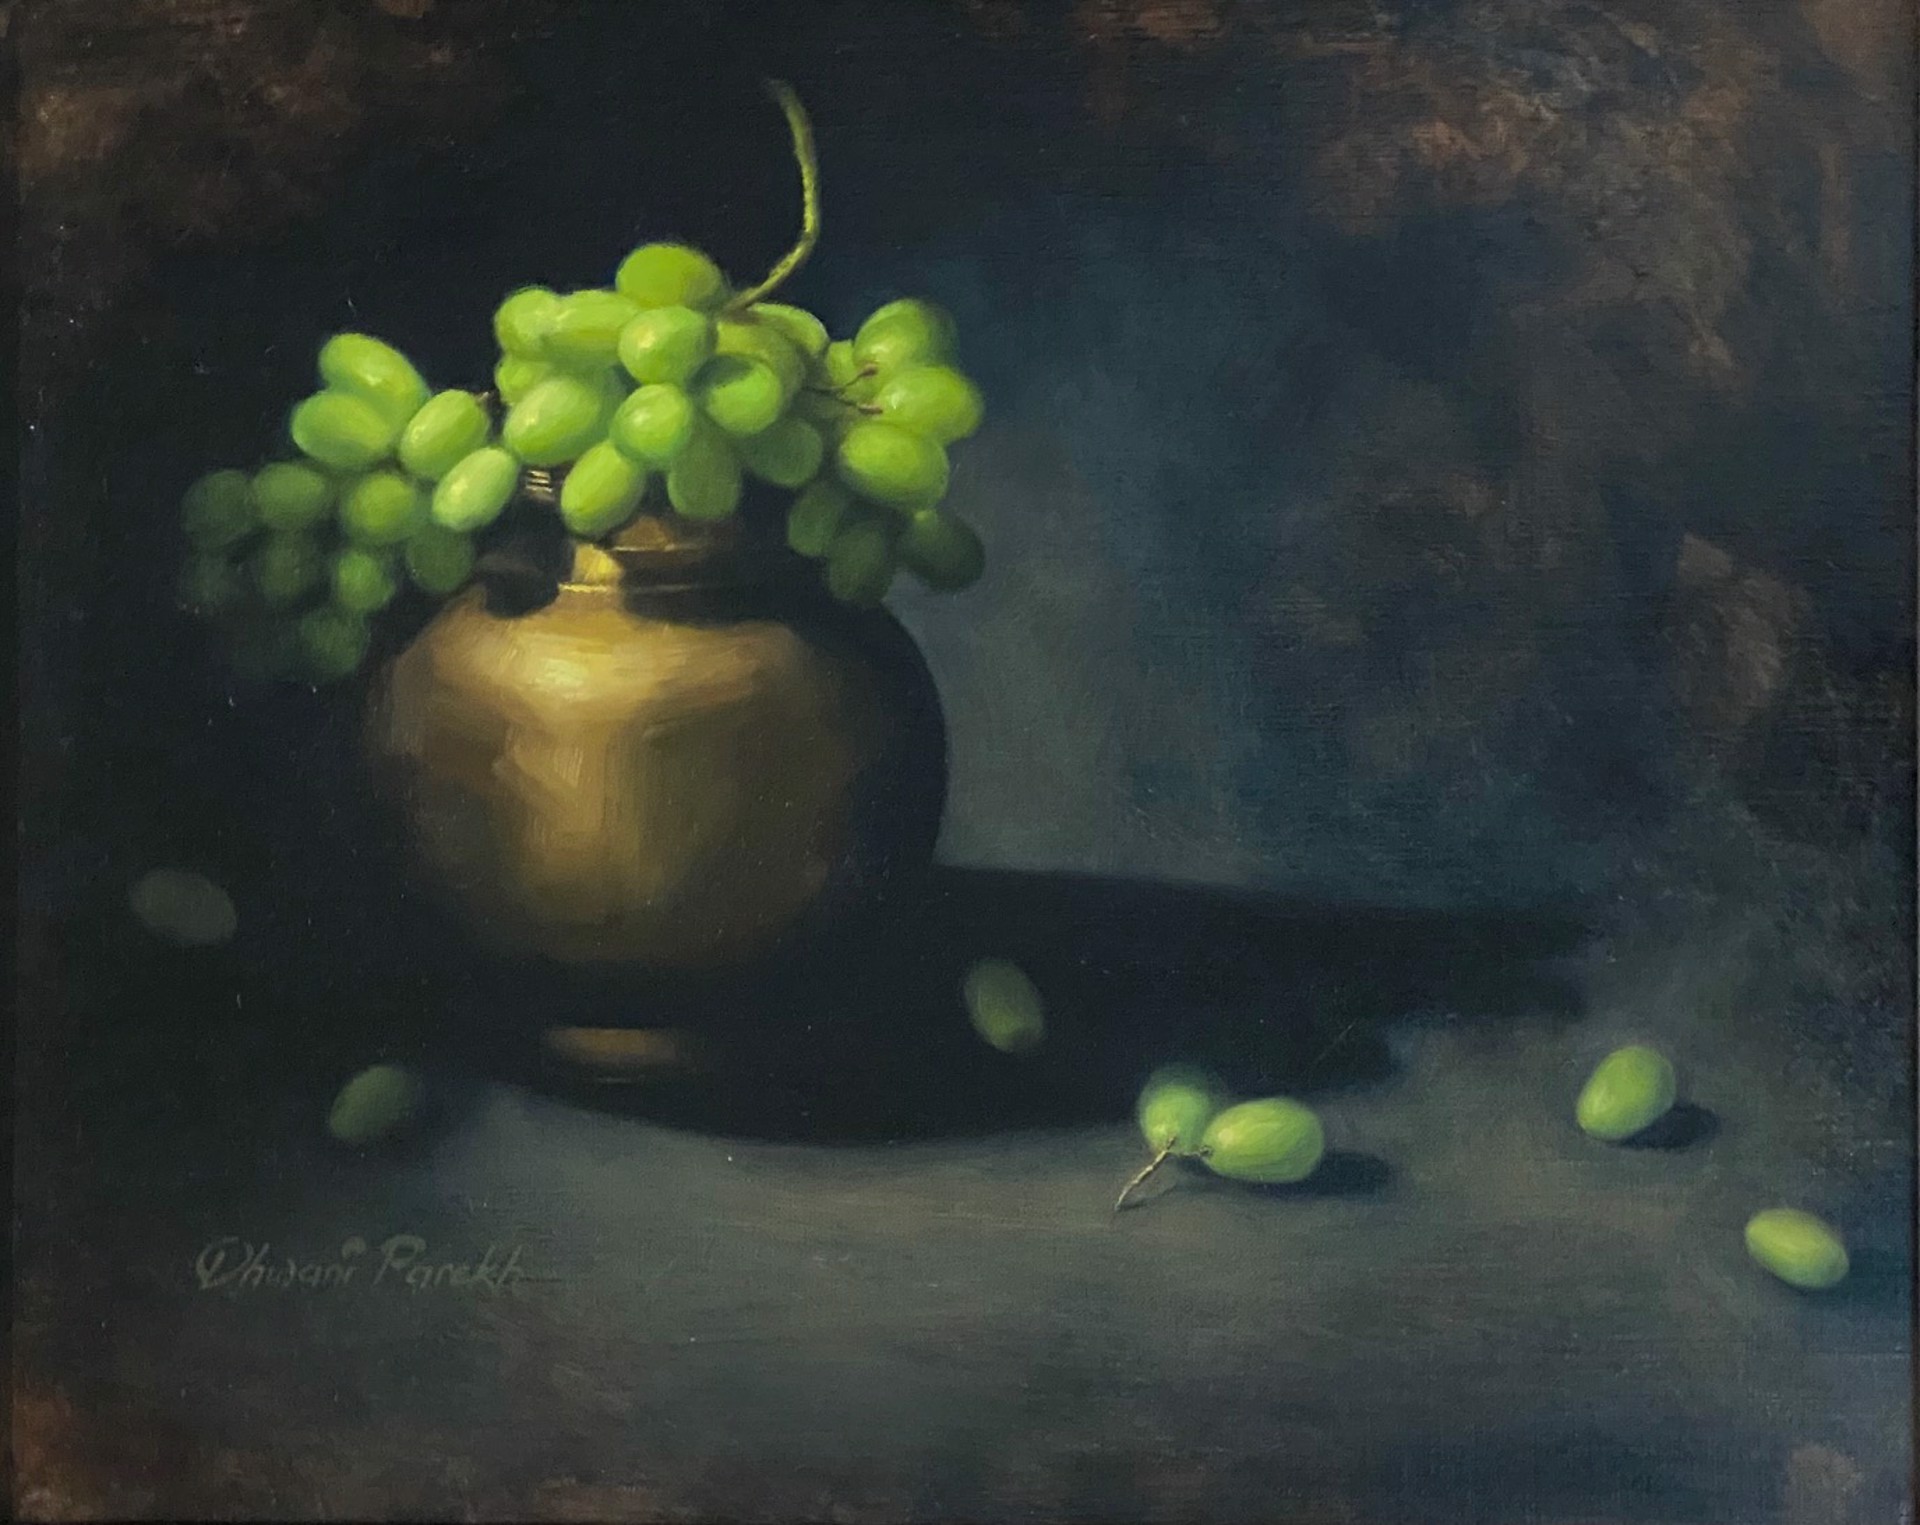 Brass and Grapes by Dhwani Parekh